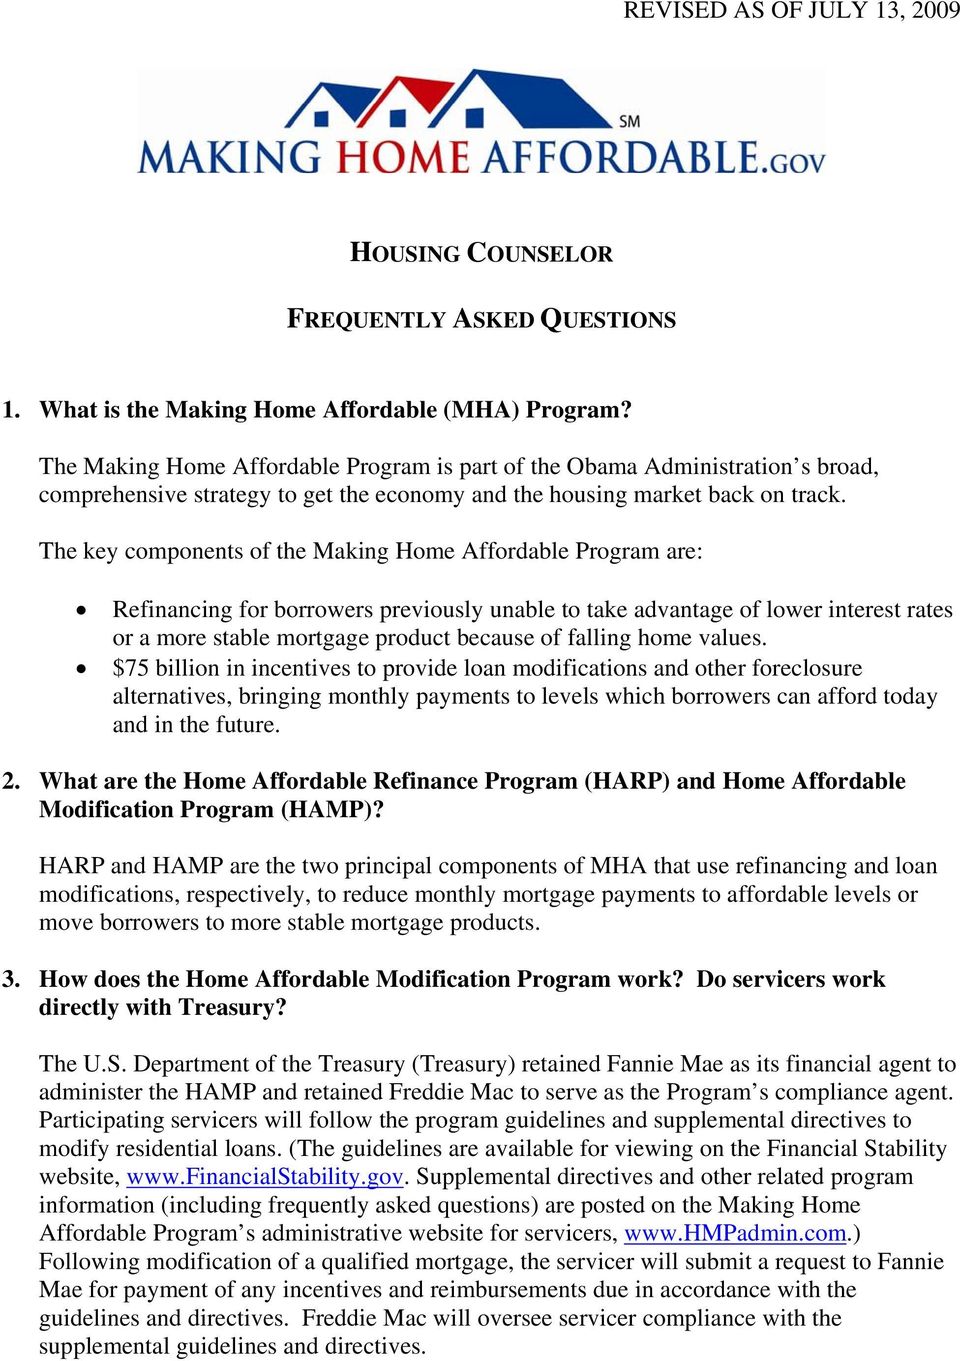 The key components of the Making Home Affordable Program are: Refinancing for borrowers previously unable to take advantage of lower interest rates or a more stable mortgage product because of